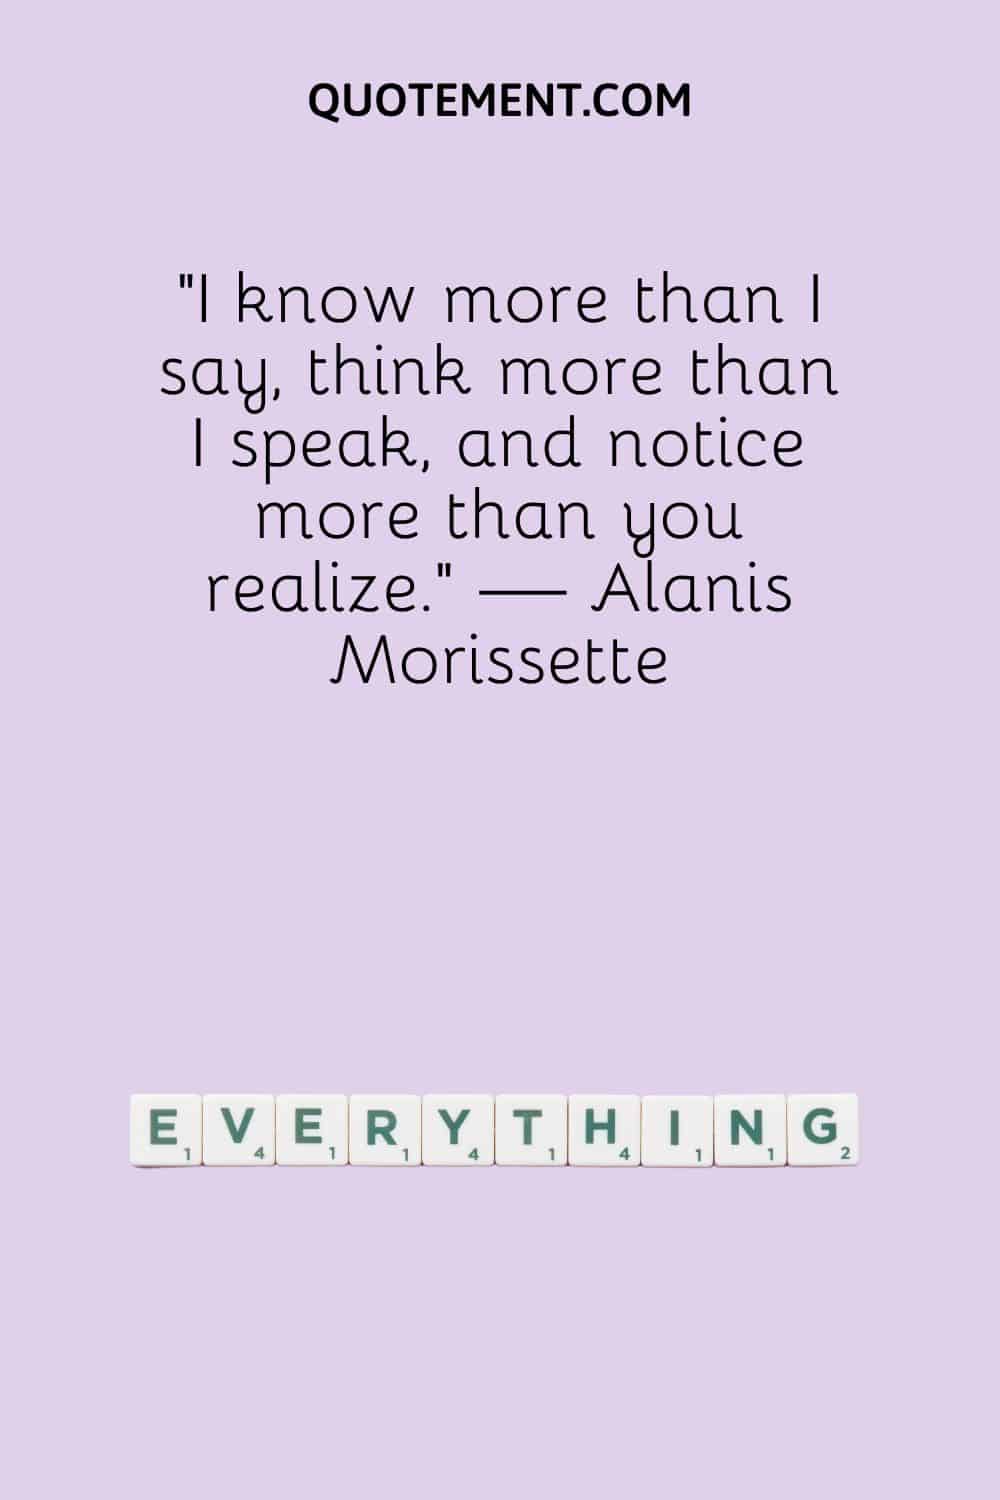 I know more than I say, think more than I speak, and notice more than you realize.